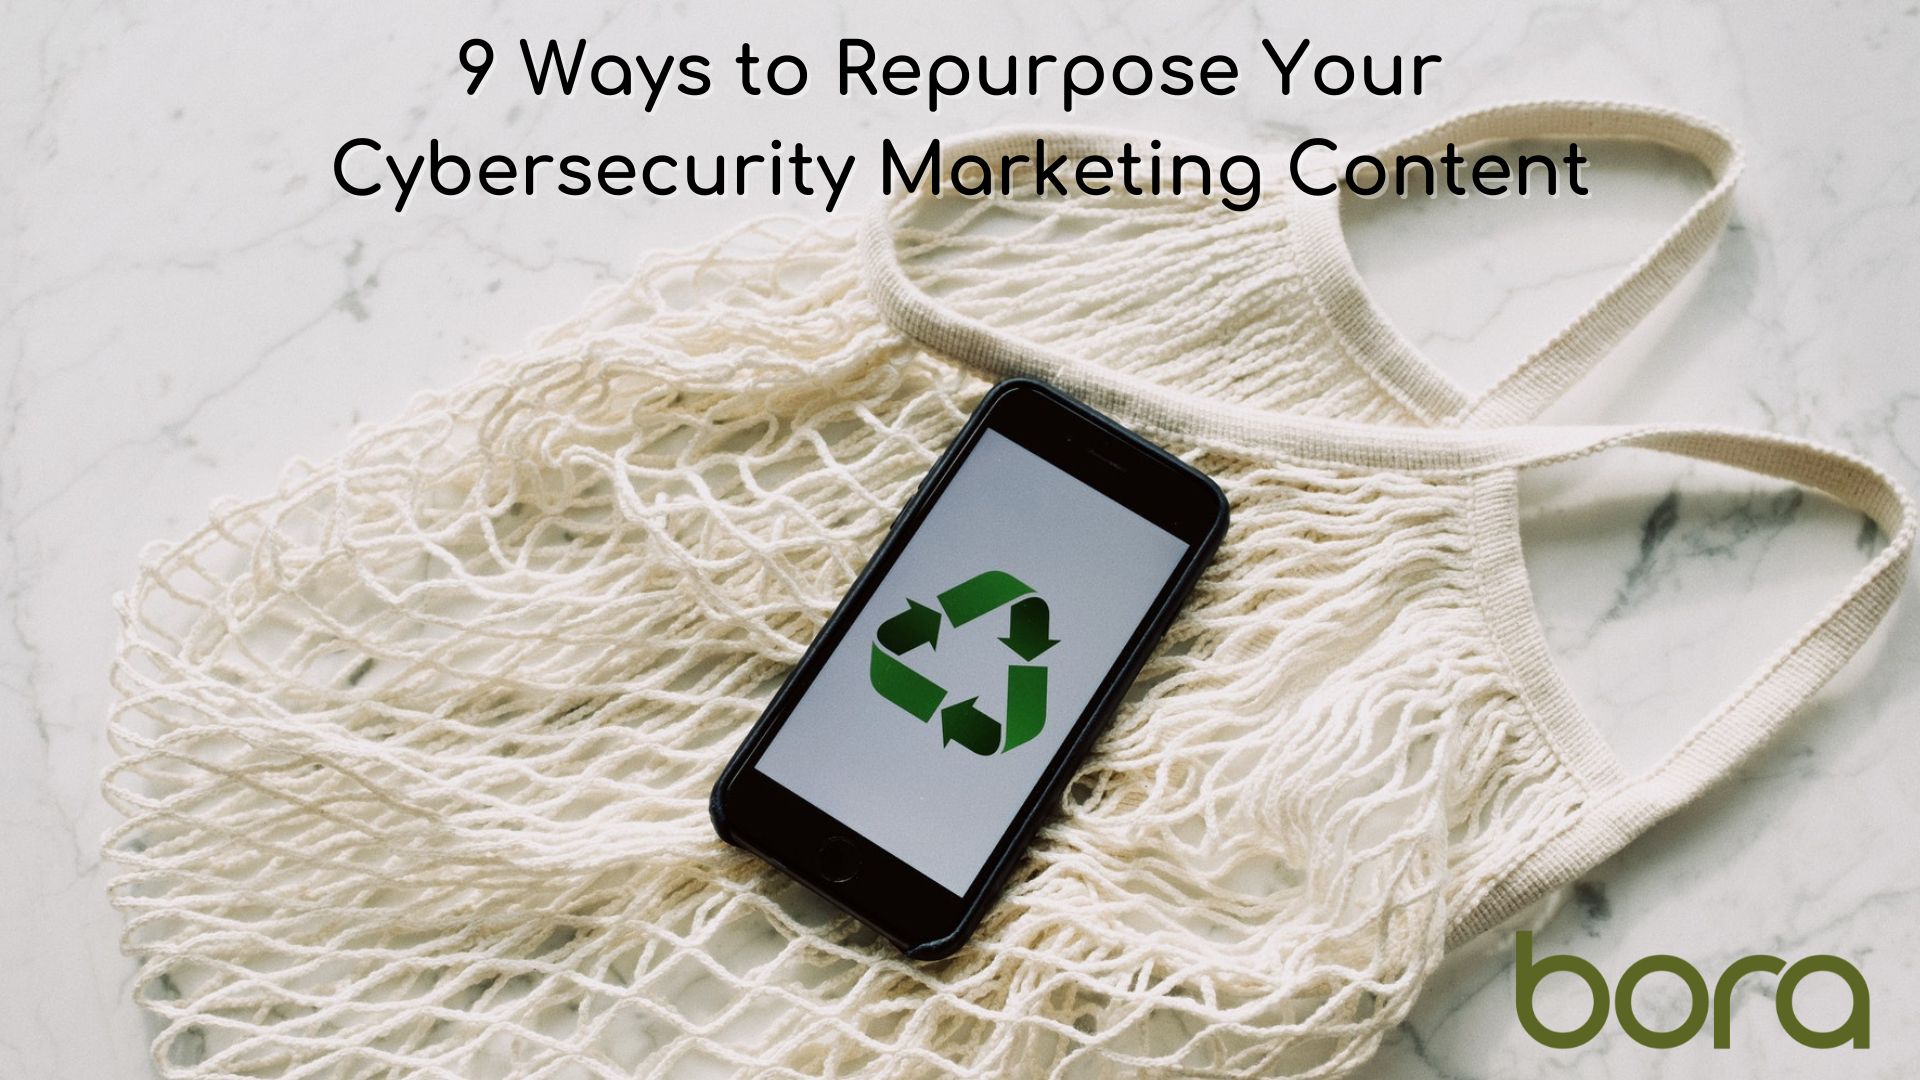 9 Ways to Repurpose Your Cybersecurity Marketing Content